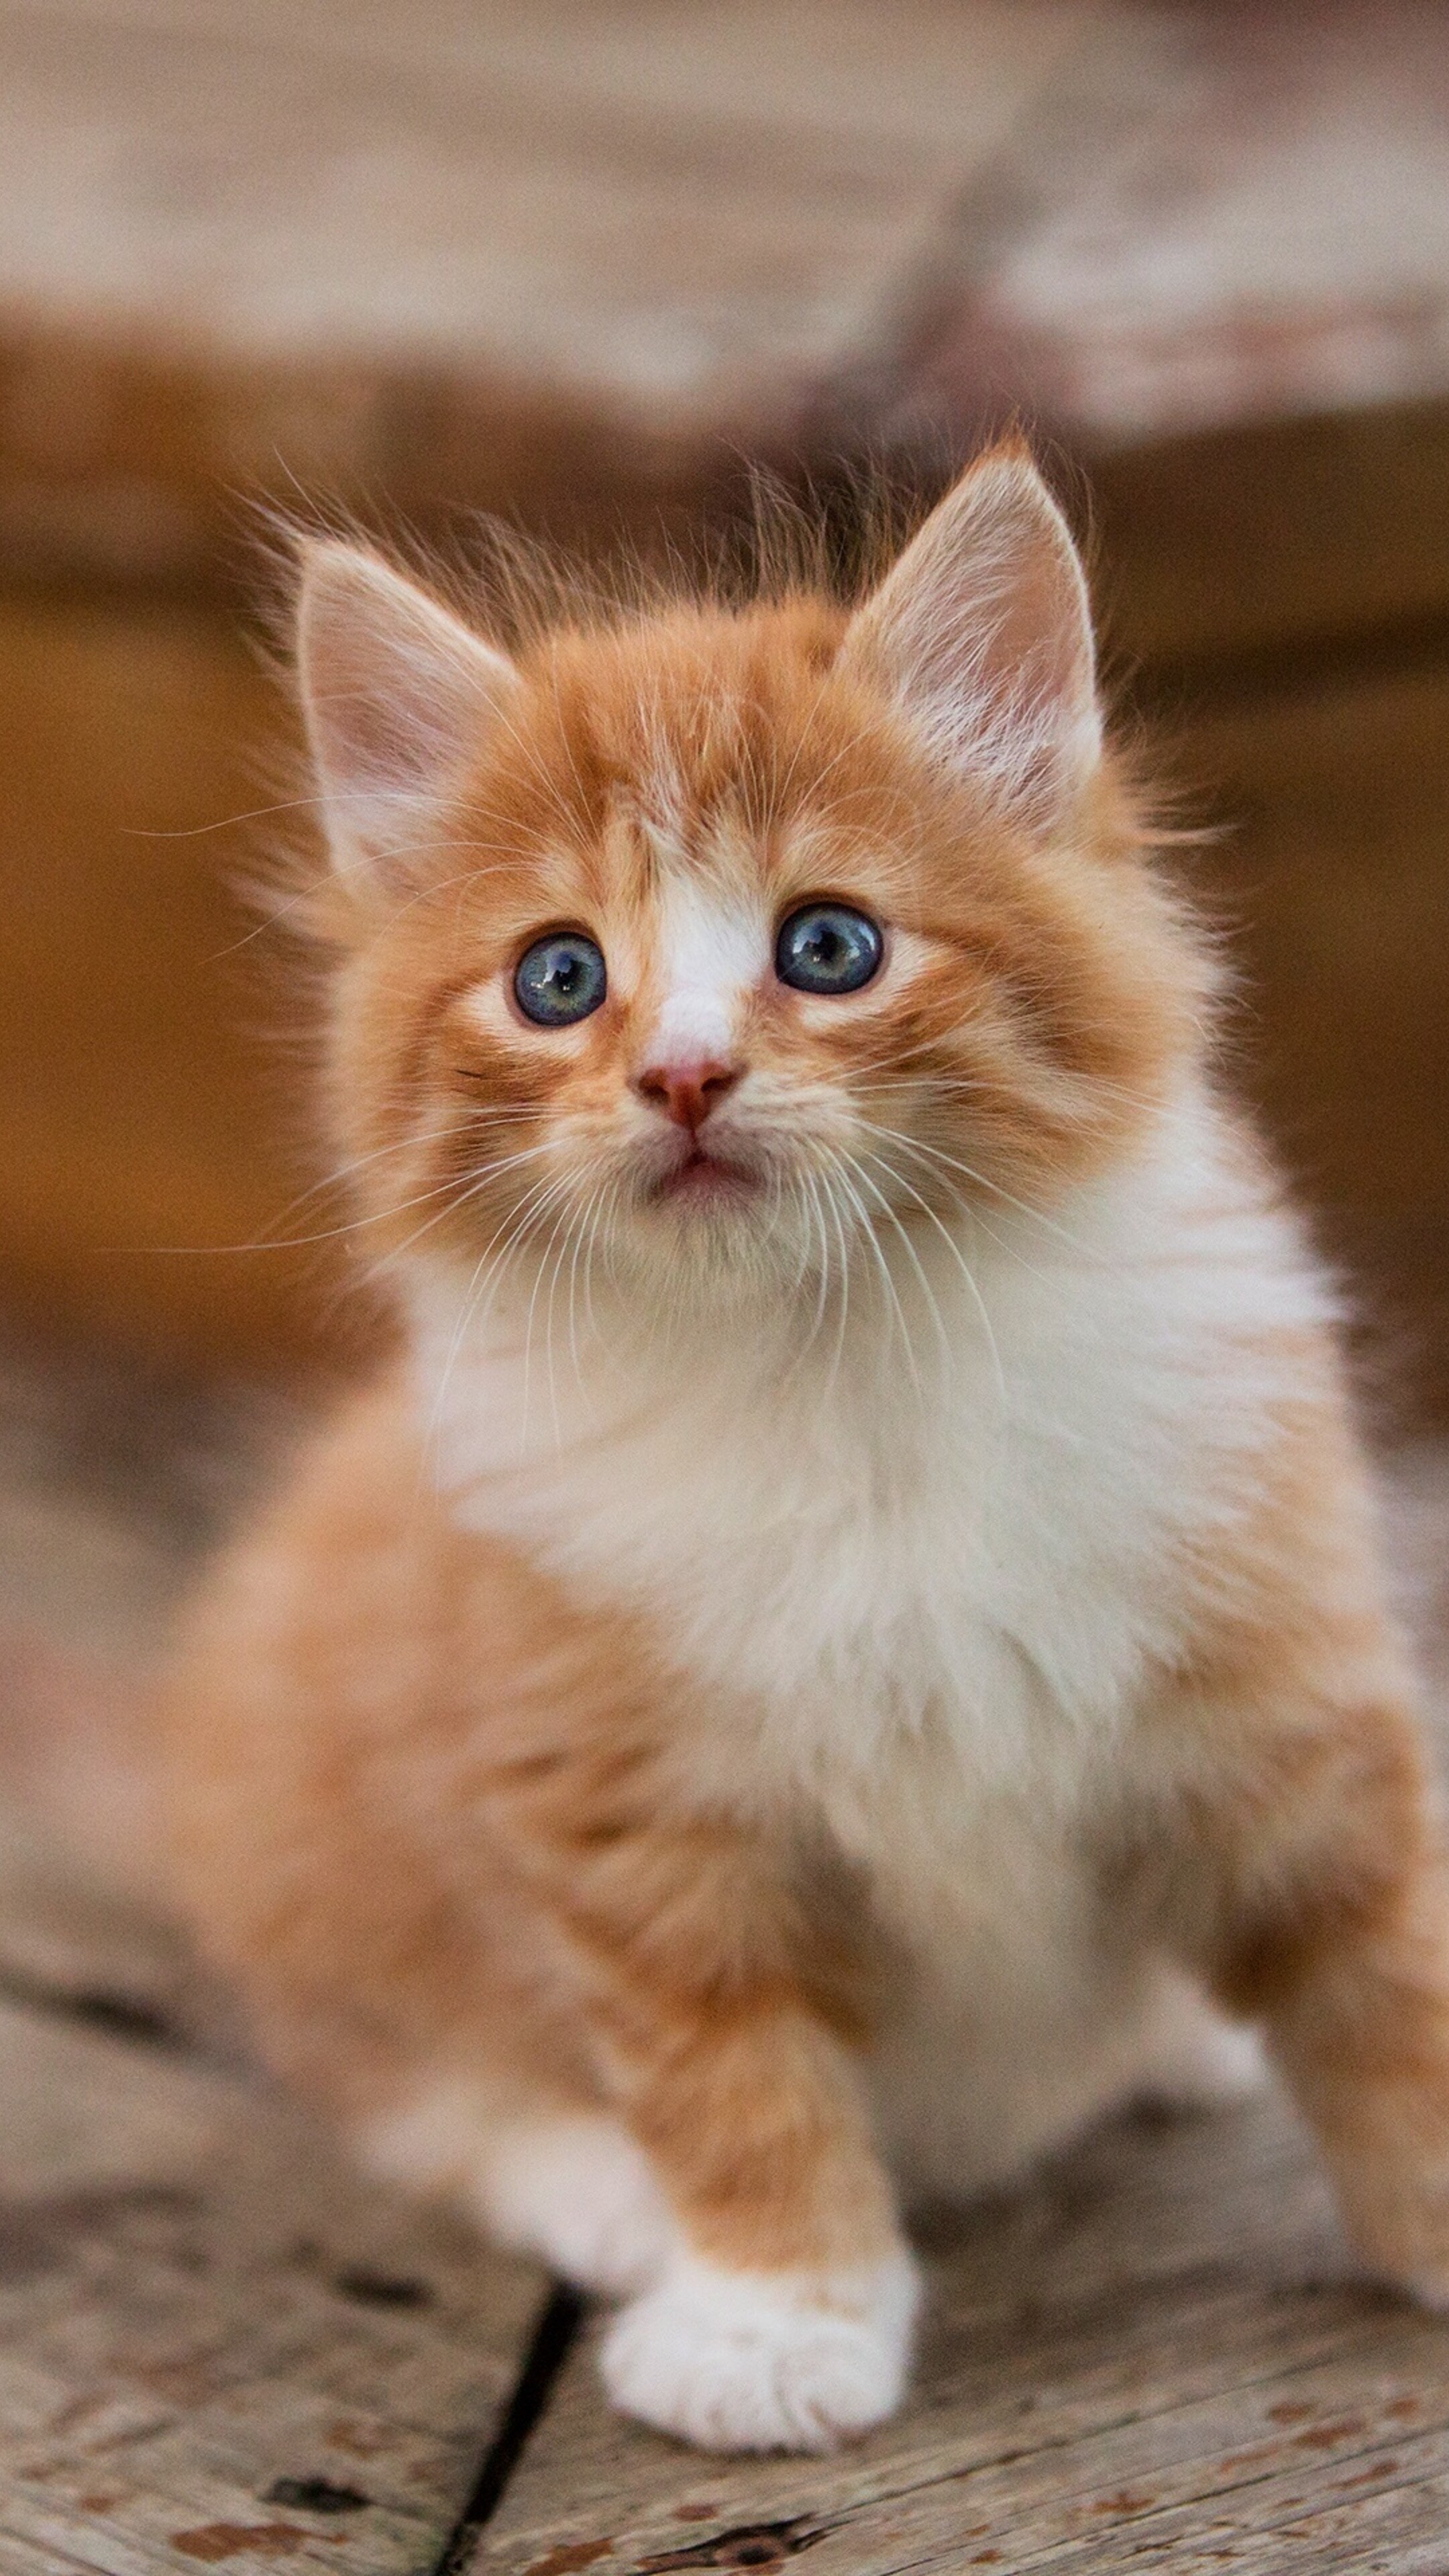 Kitten: Cat, A furry animal that has a long tail and sharp claws, Paws. 2160x3840 4K Wallpaper.